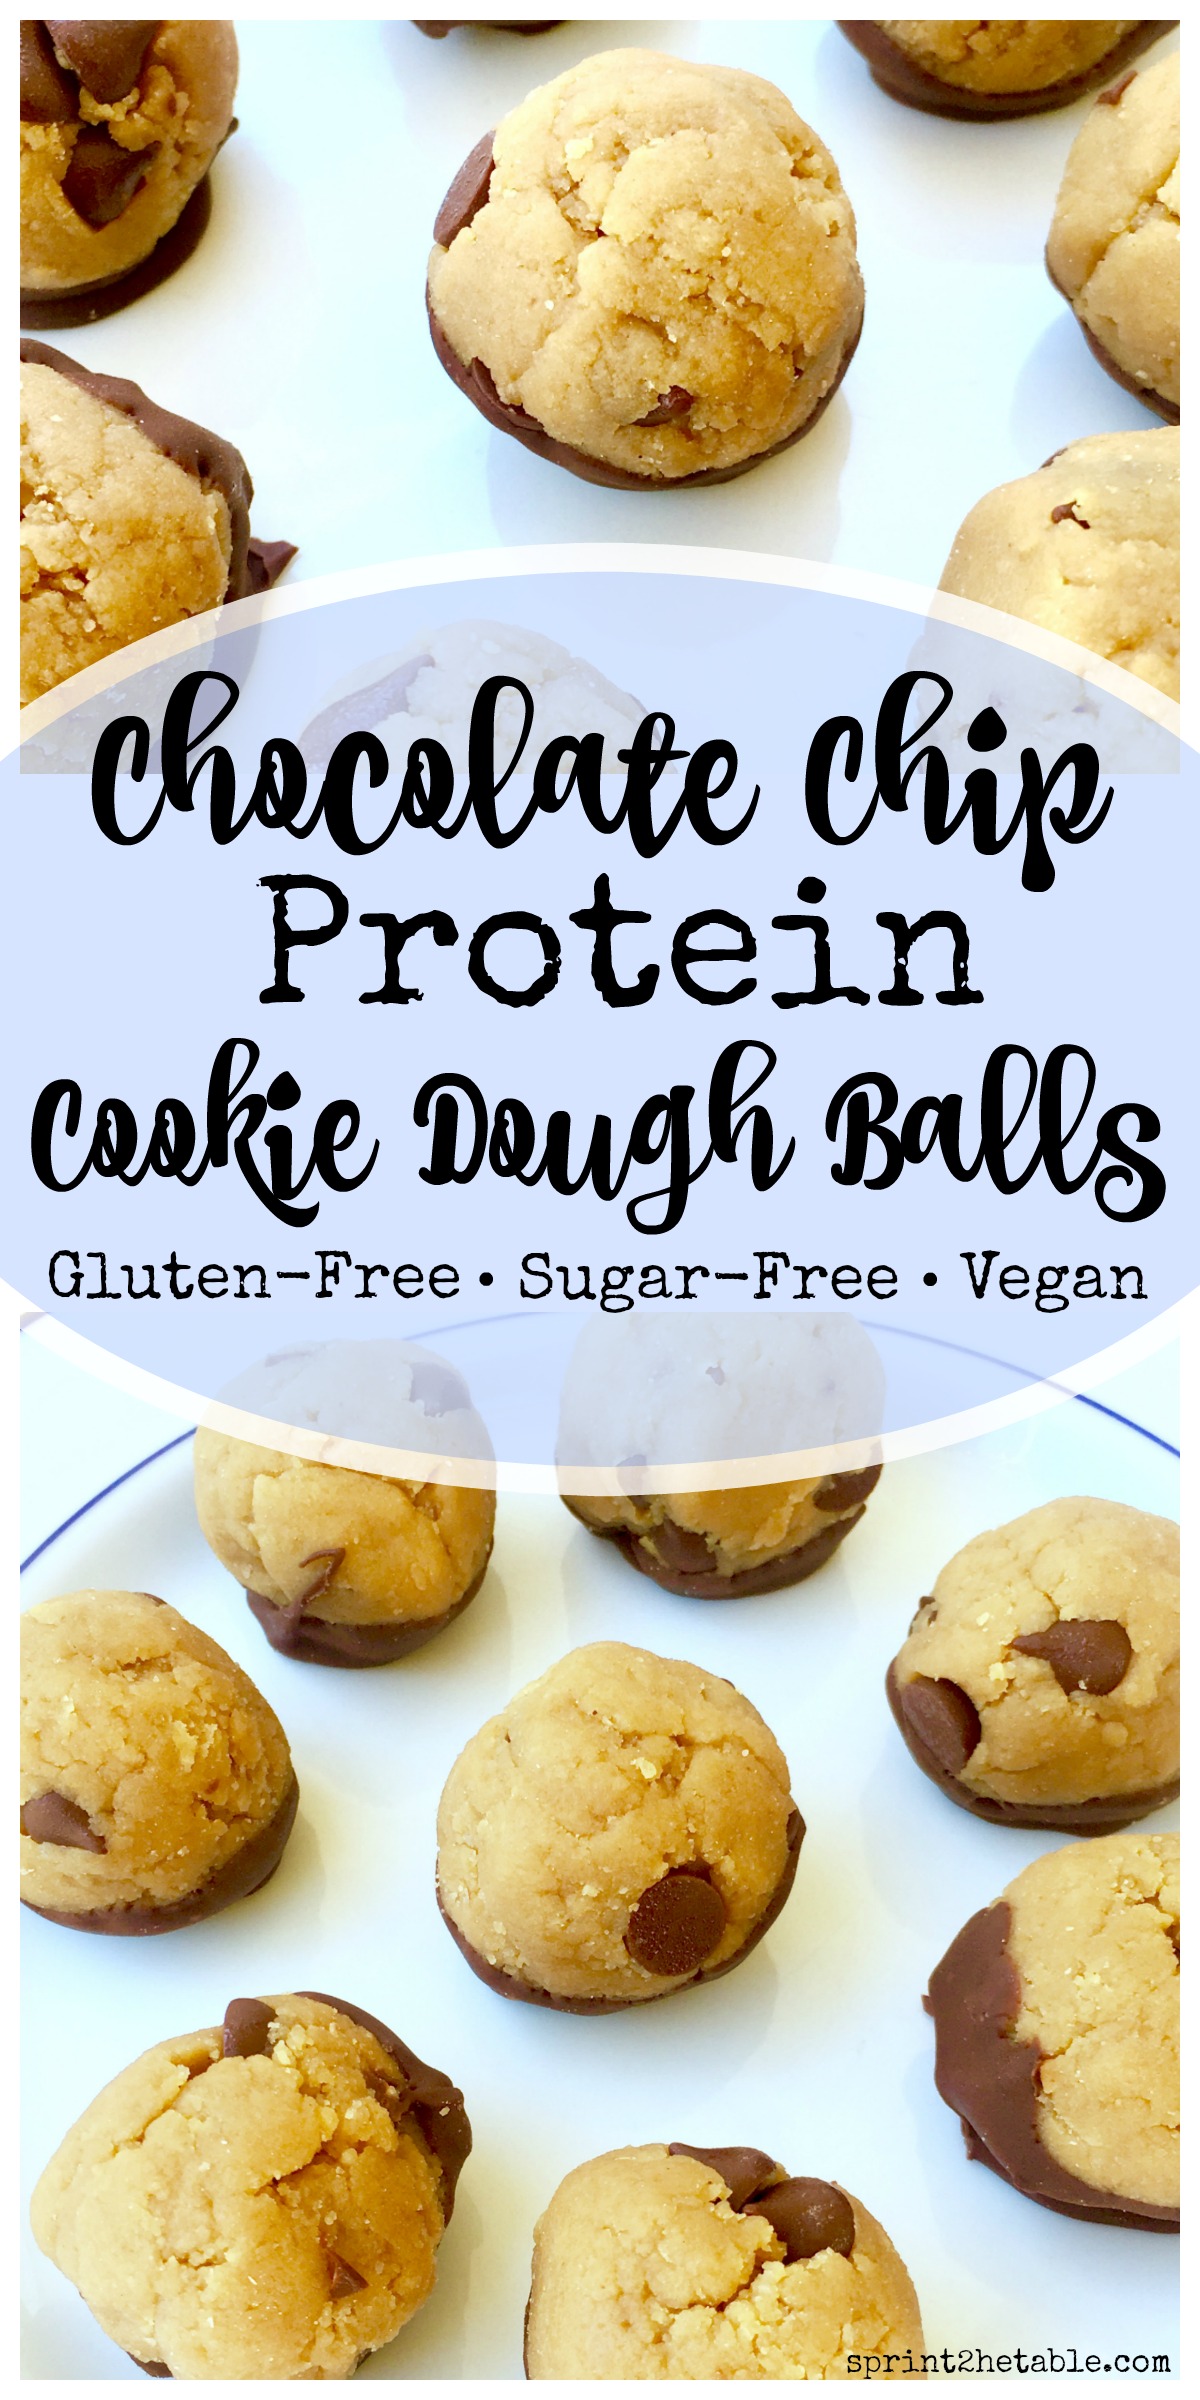 Do you ever make chocolate chip cookies just so you can eat the batter? Ever wish that batter was healthy? These low carb, protein-packed, healthy chocolate chip cookie dough balls are for you!